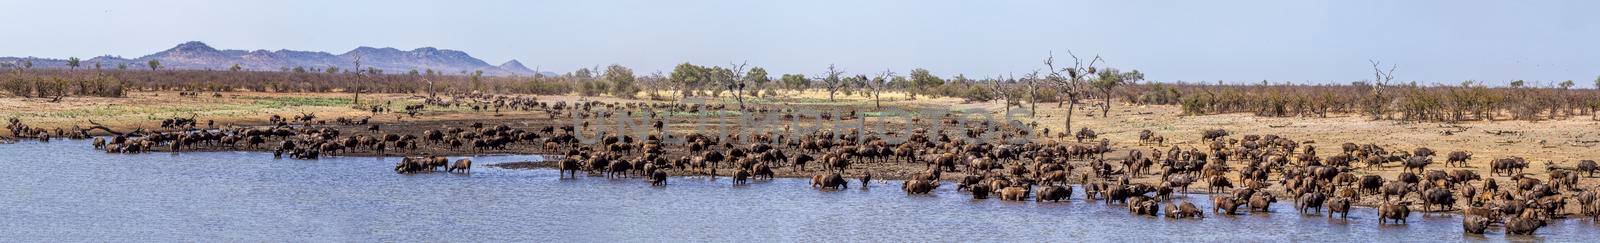 African buffalo in Kruger National park, South Africa ; Specie Syncerus caffer family of Bovidae